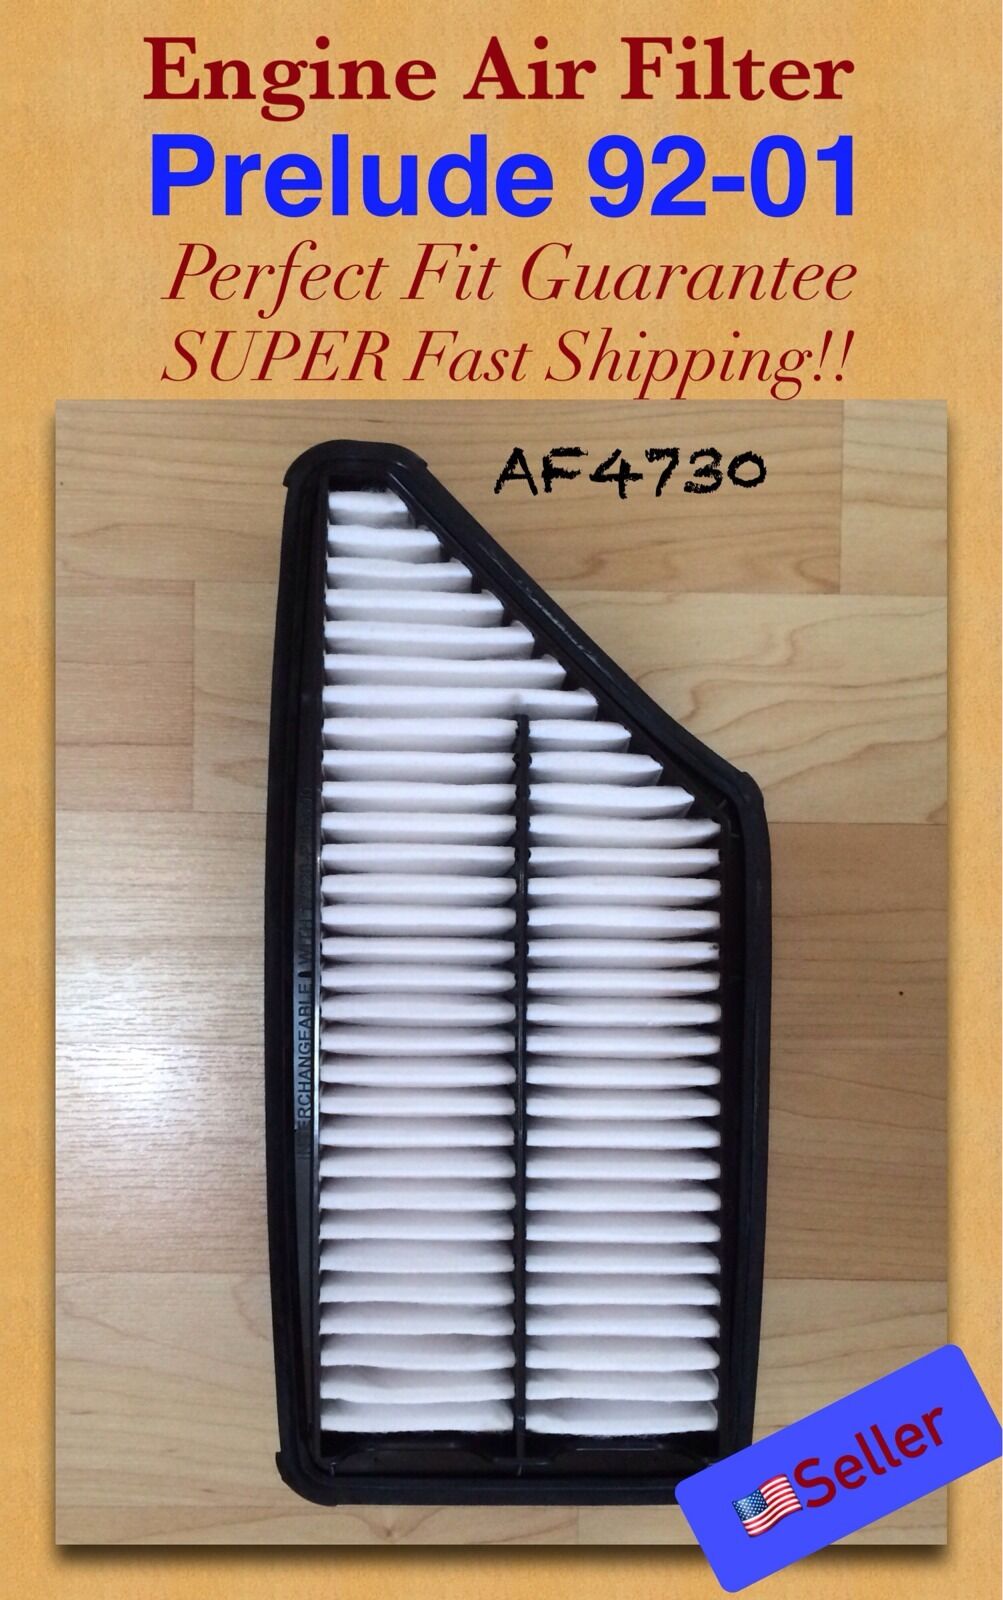 Prelude 92-01 Engine Air Filter AF4730 Perfect Fit Guarantee + SUPER Fast Ship